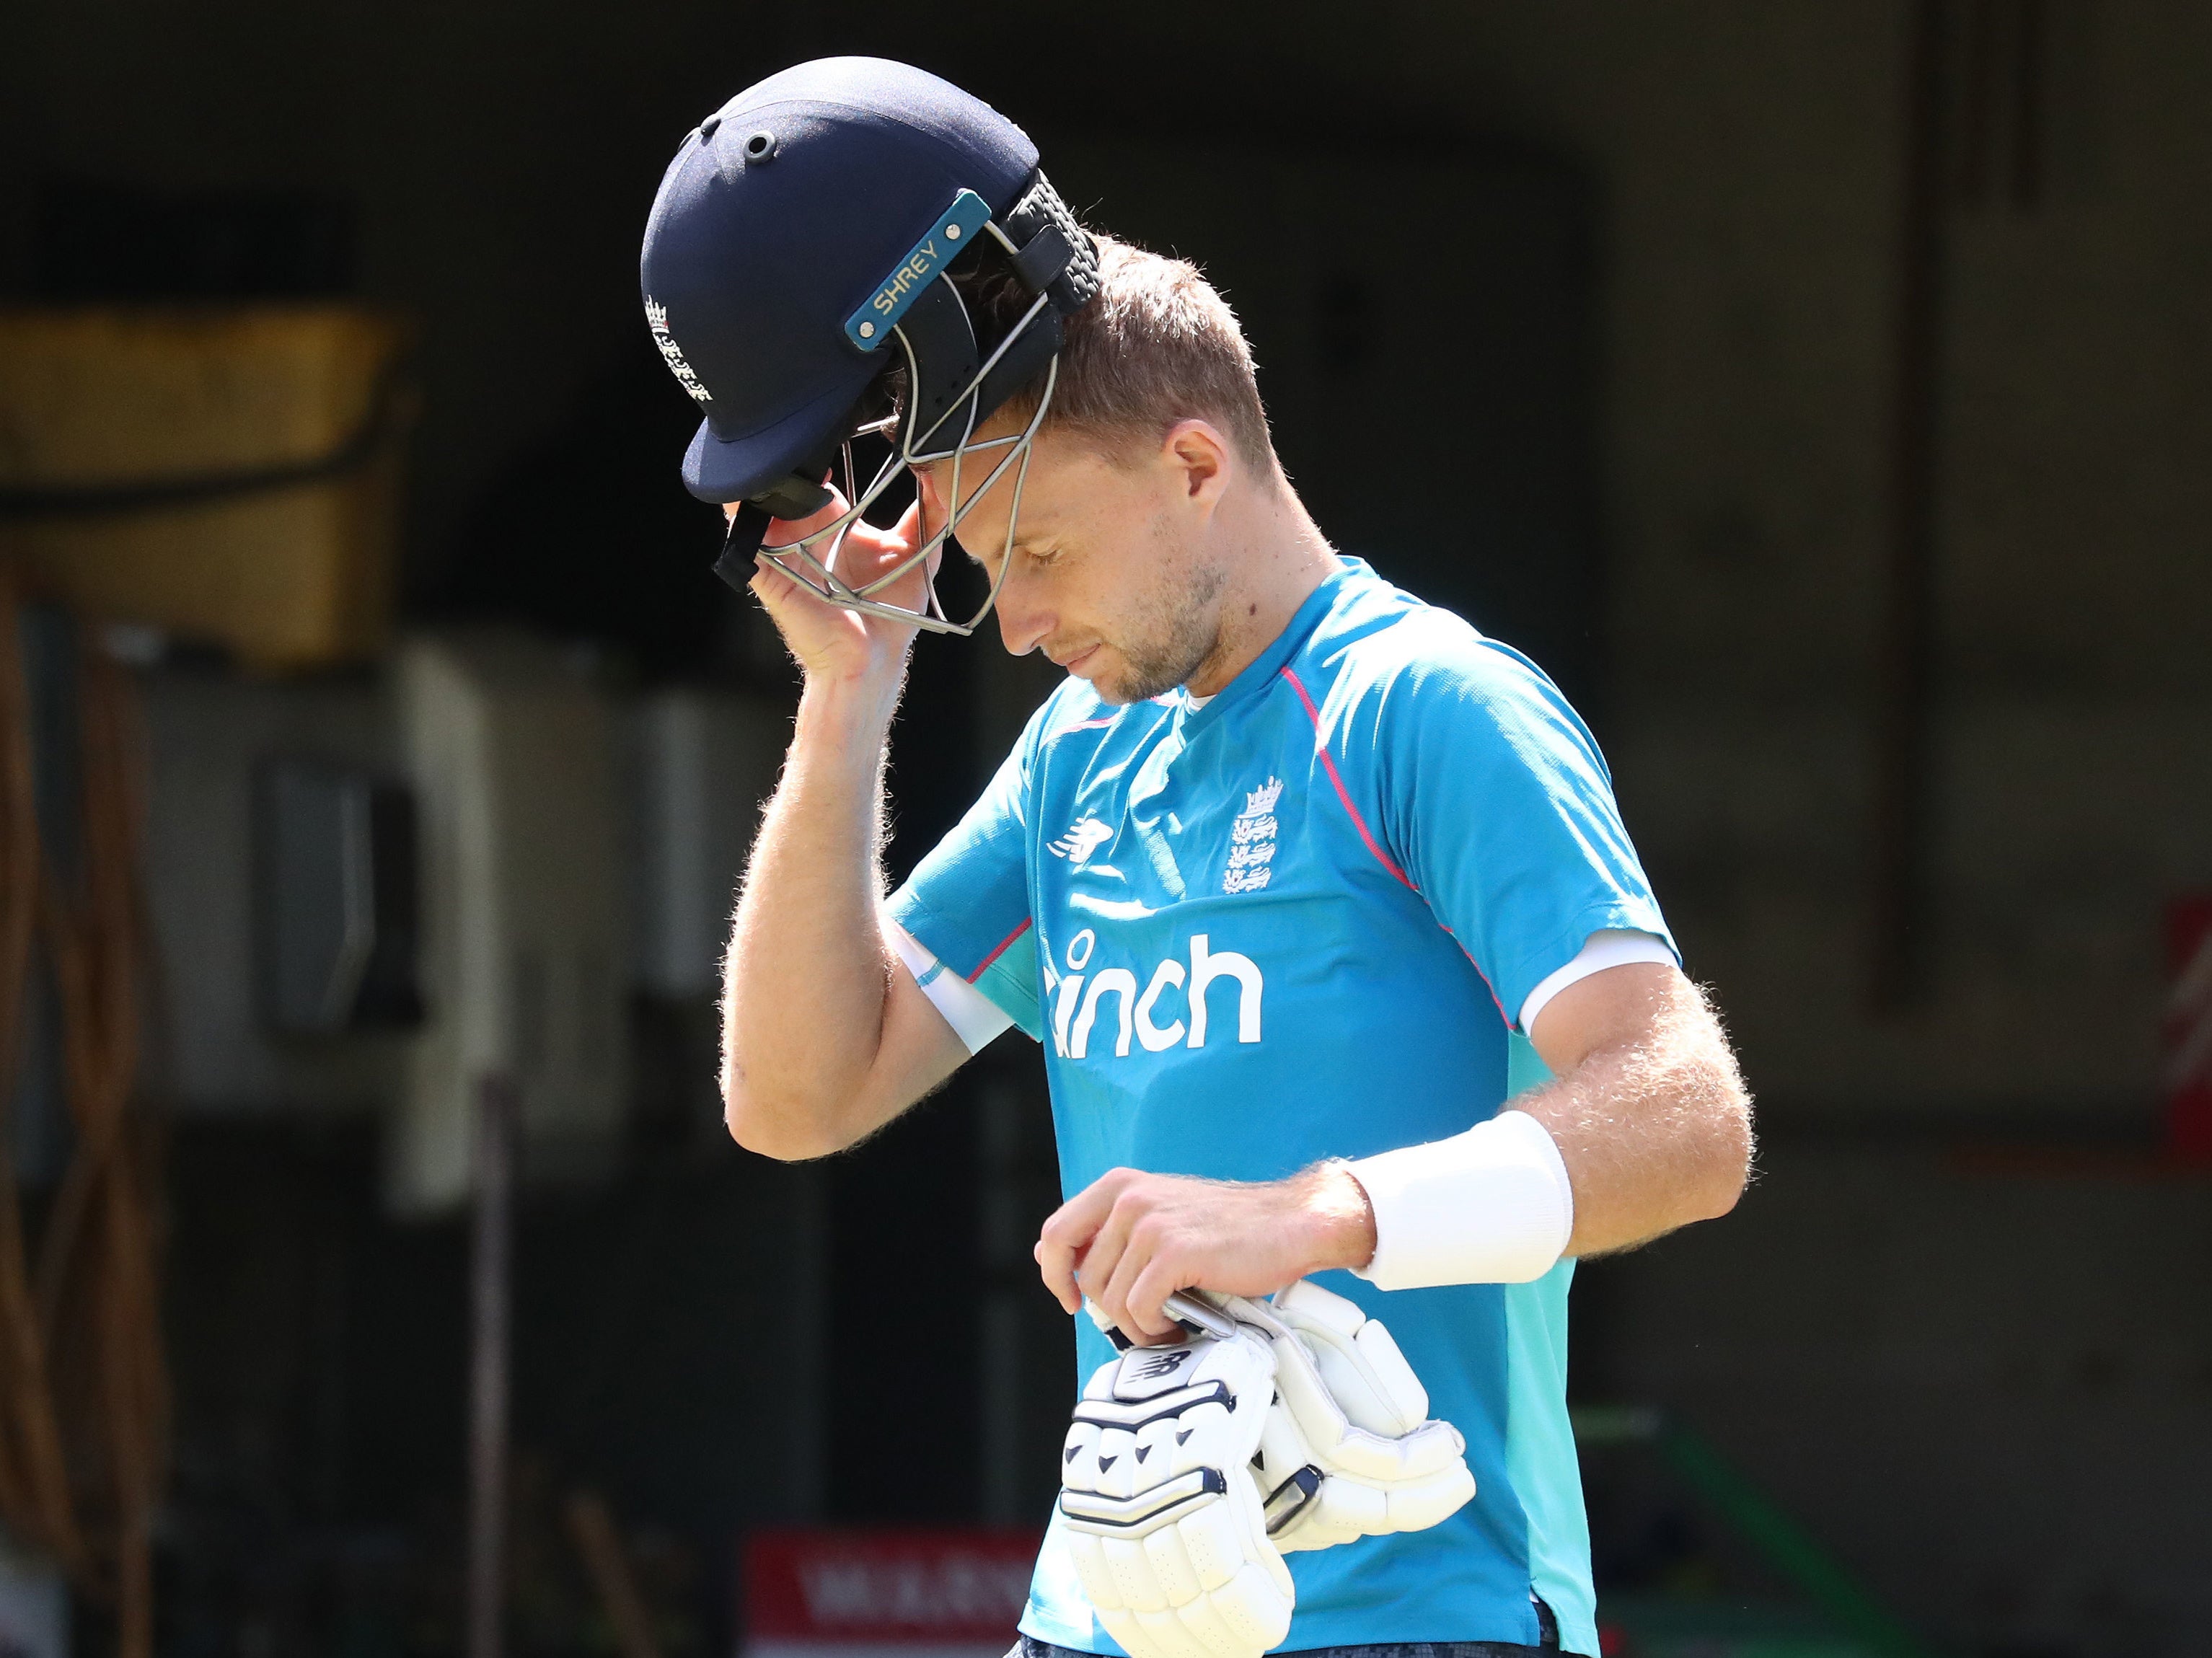 Joe Root’s side know they must respond in Melbourne